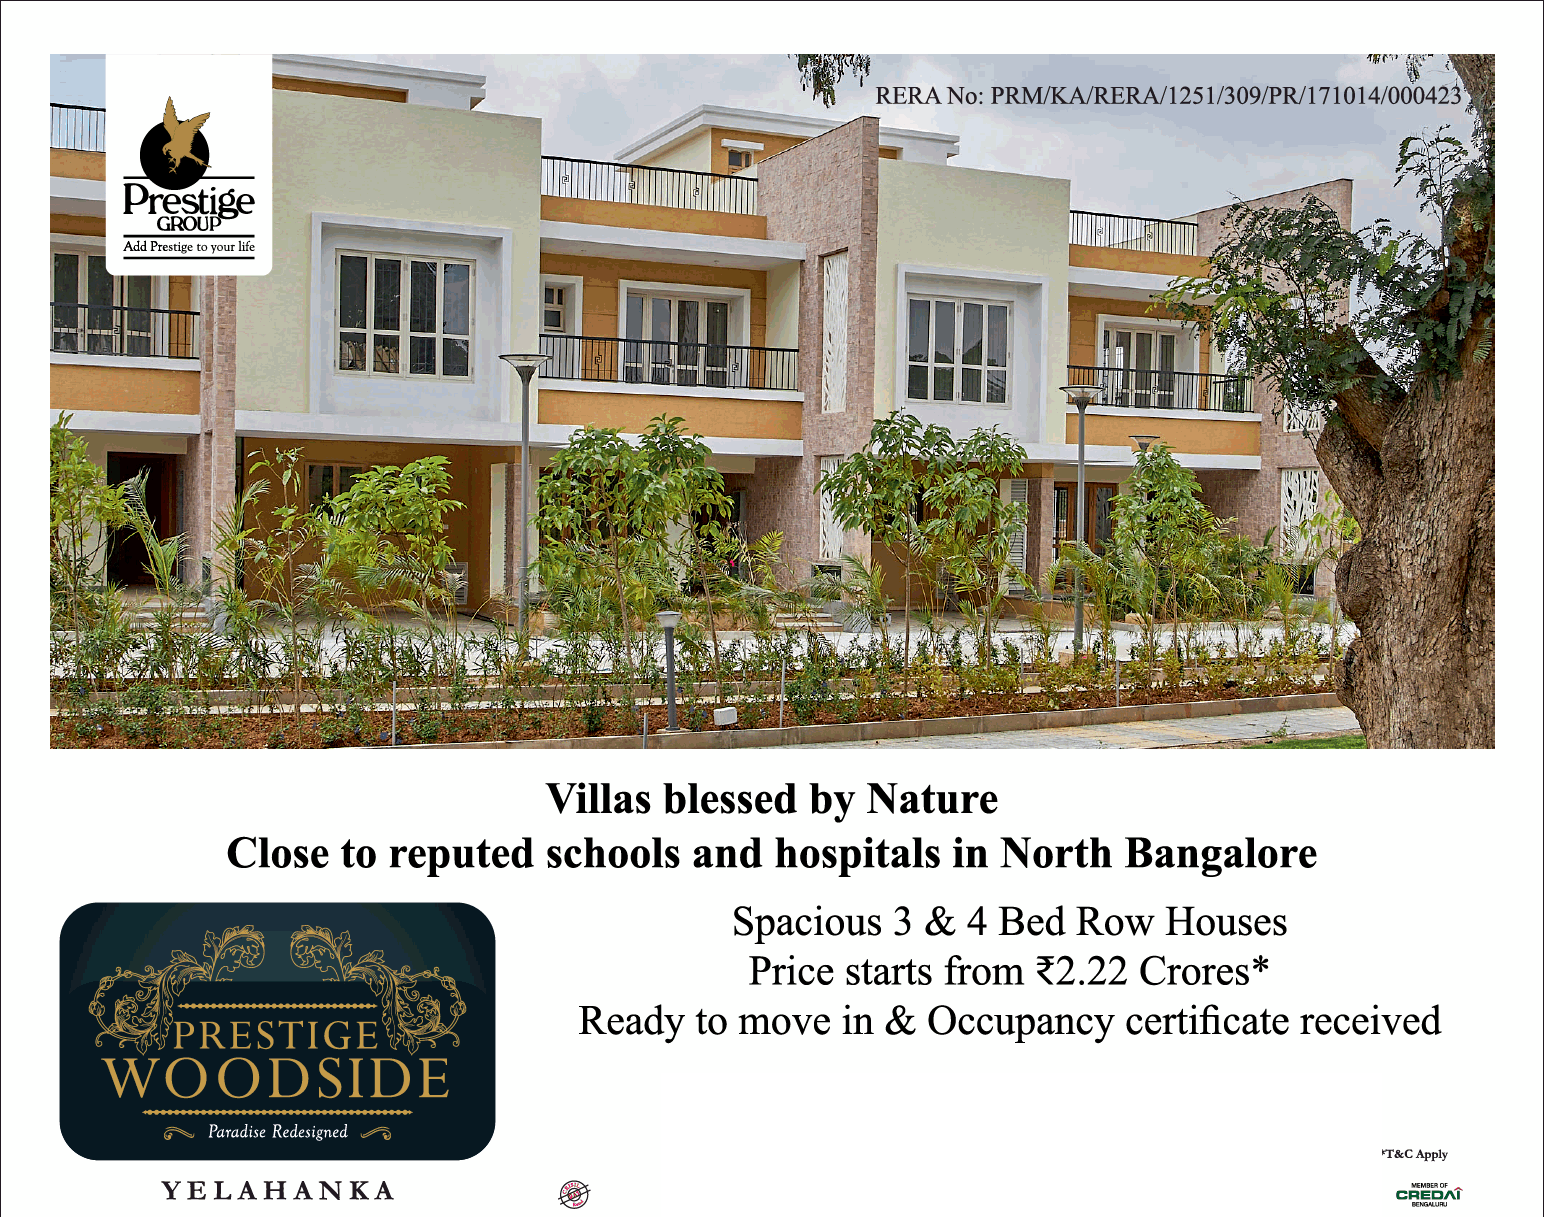 Ready to move in & occupancy certificate received at Prestige Woodside, Bangalore Update